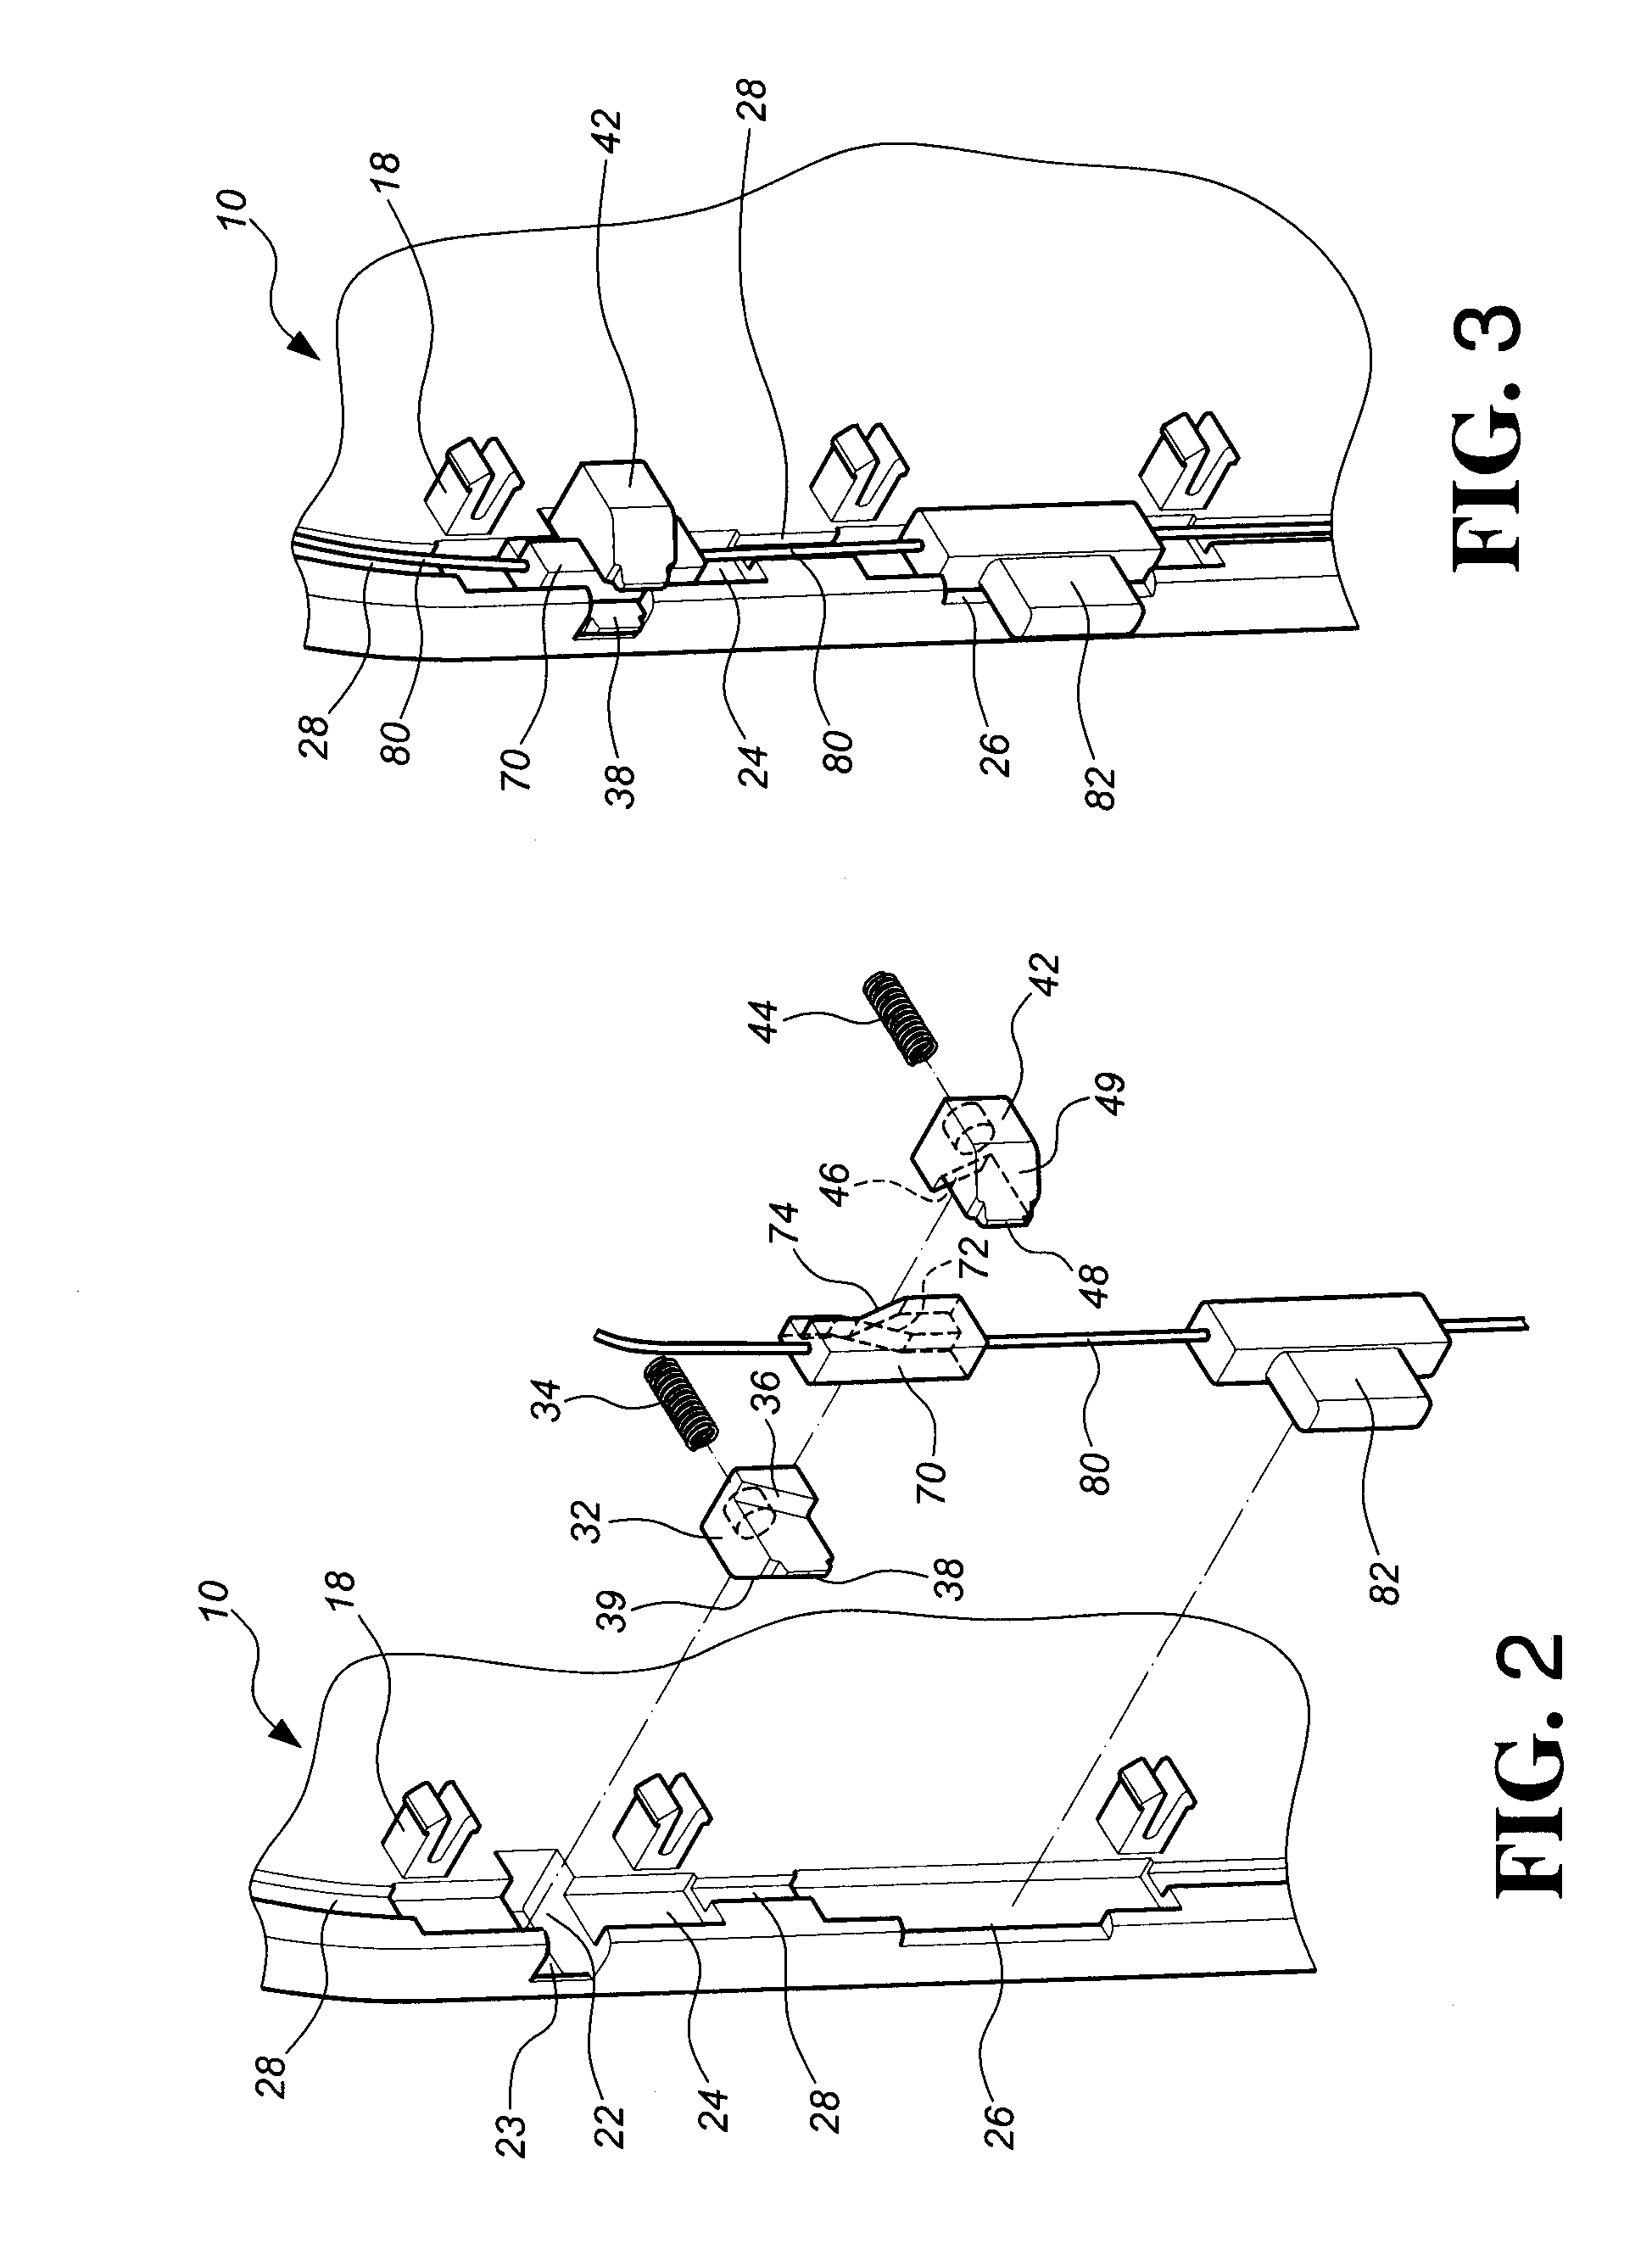 Housing assembly for a portable electronic device